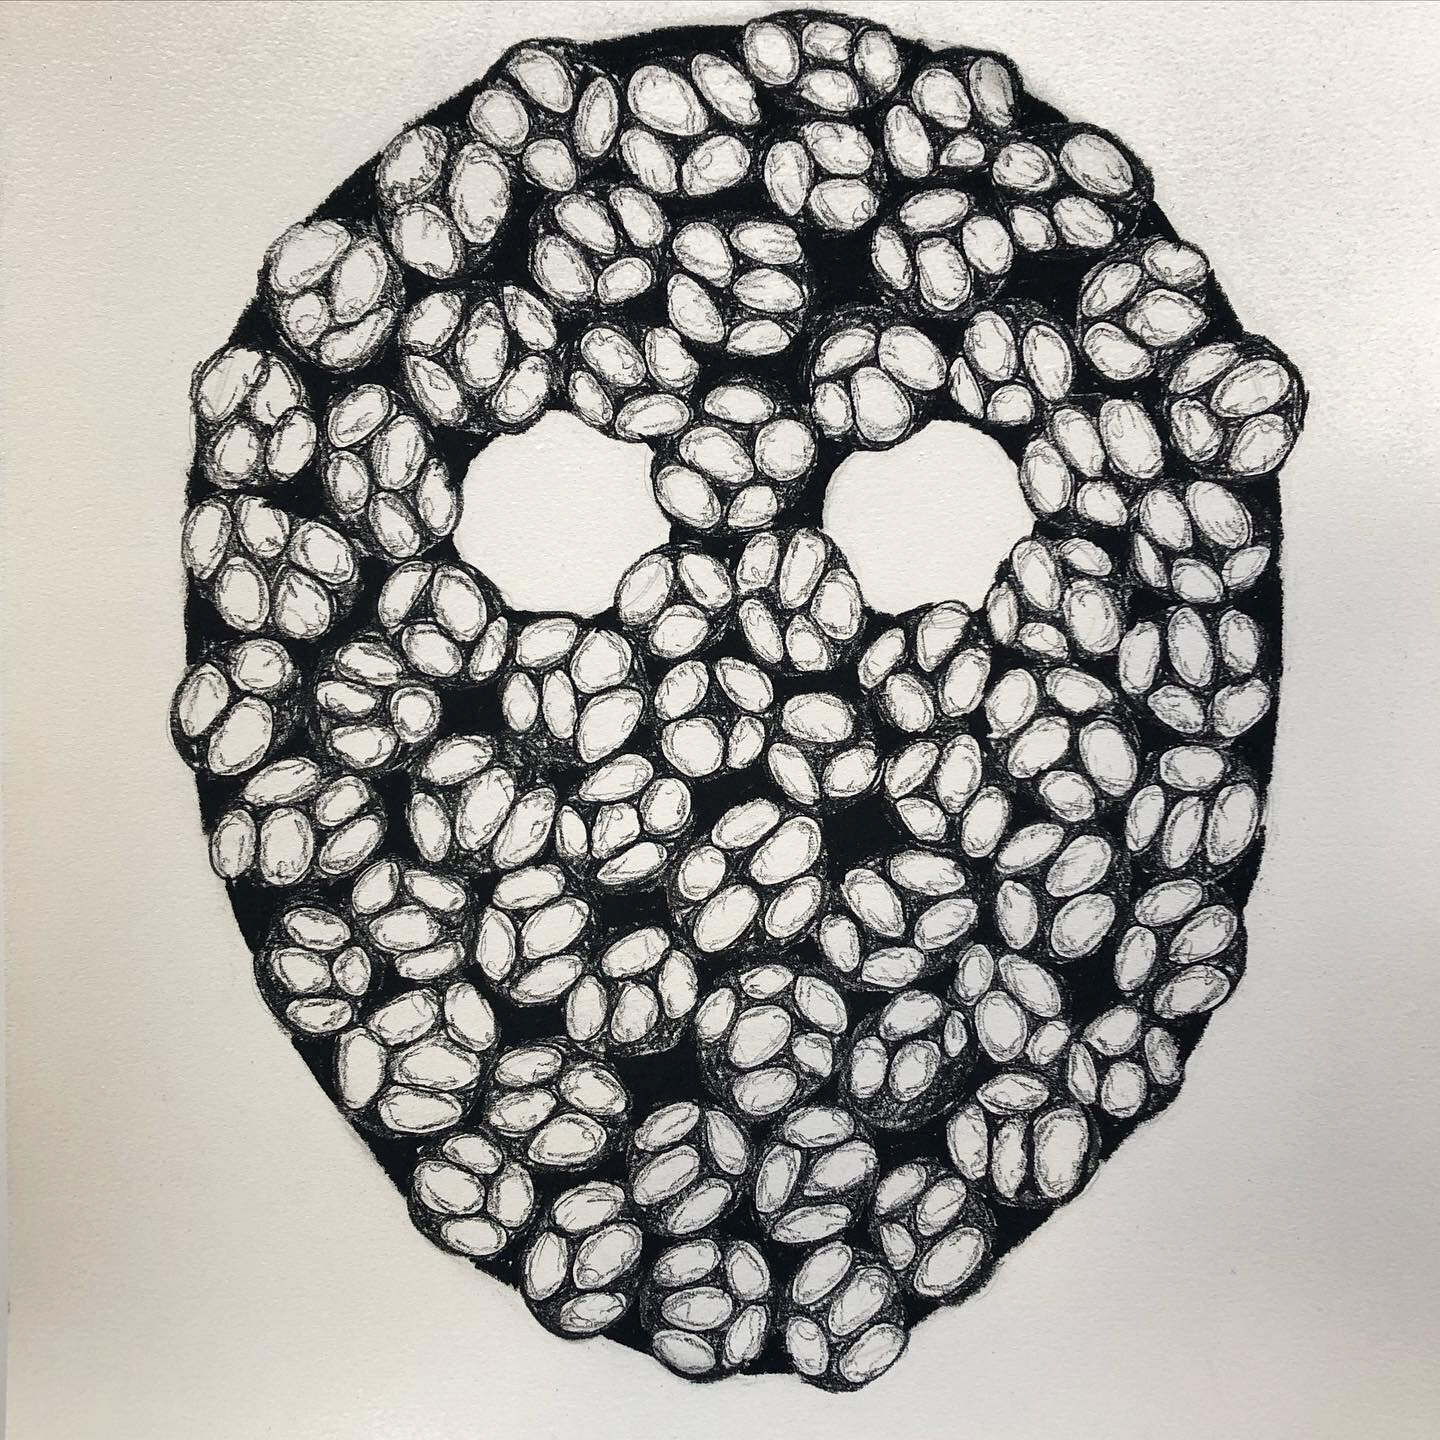 Mask, 2020, charcoal on paper, 15 1/2 x 13 3/4"